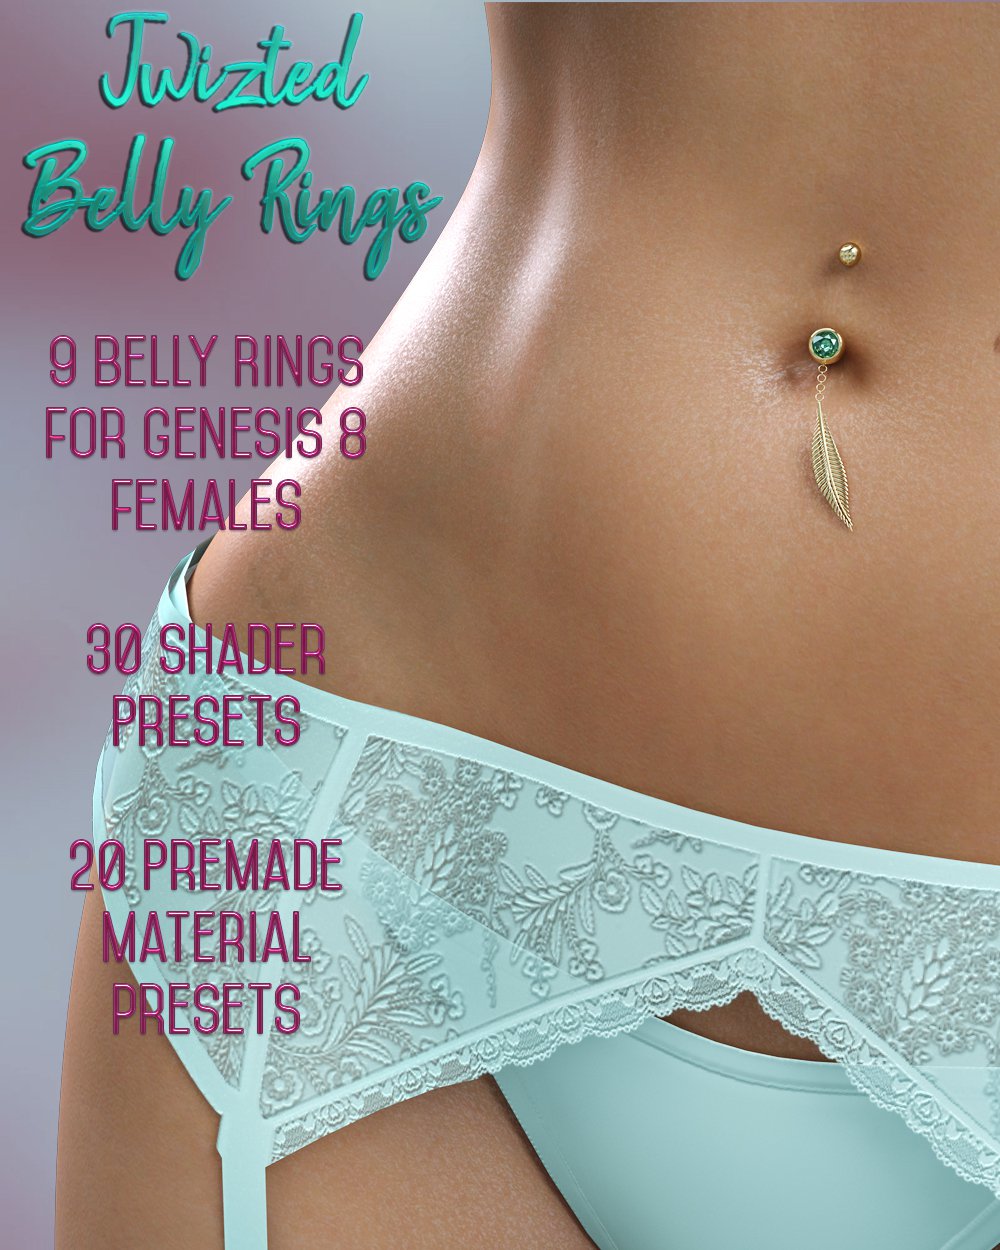 Twizted Belly Rings for Genesis 8 Females_DAZ3D下载站